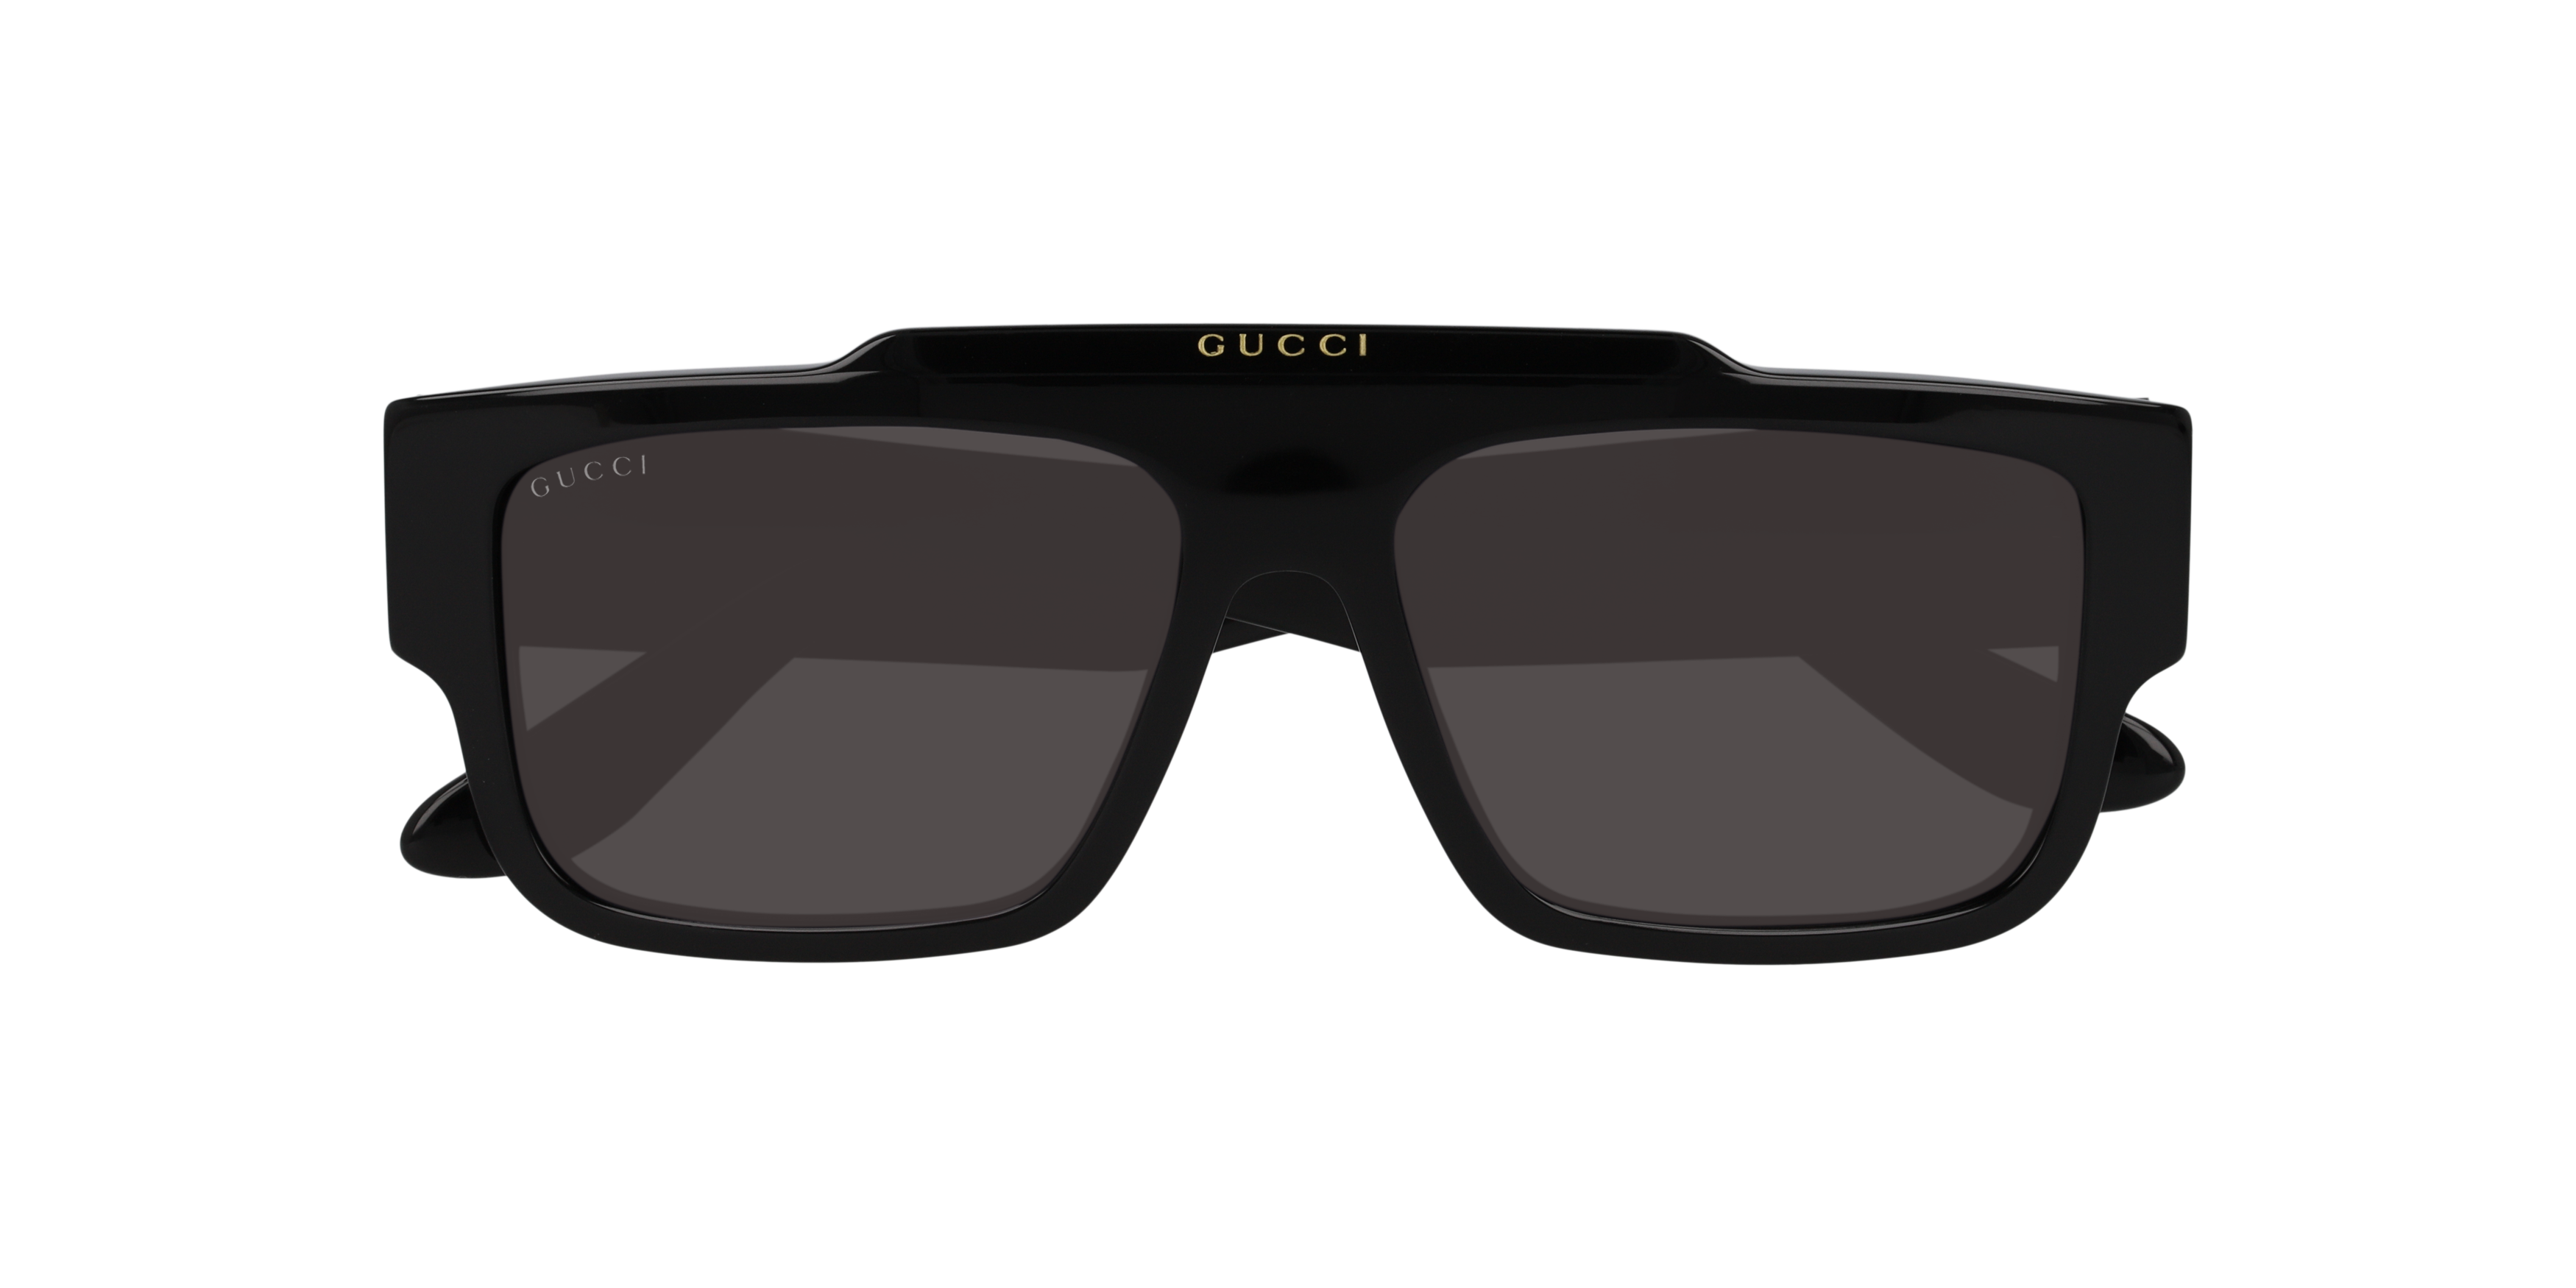 [products.image.folded] Gucci GG1460S 001 Solbriller